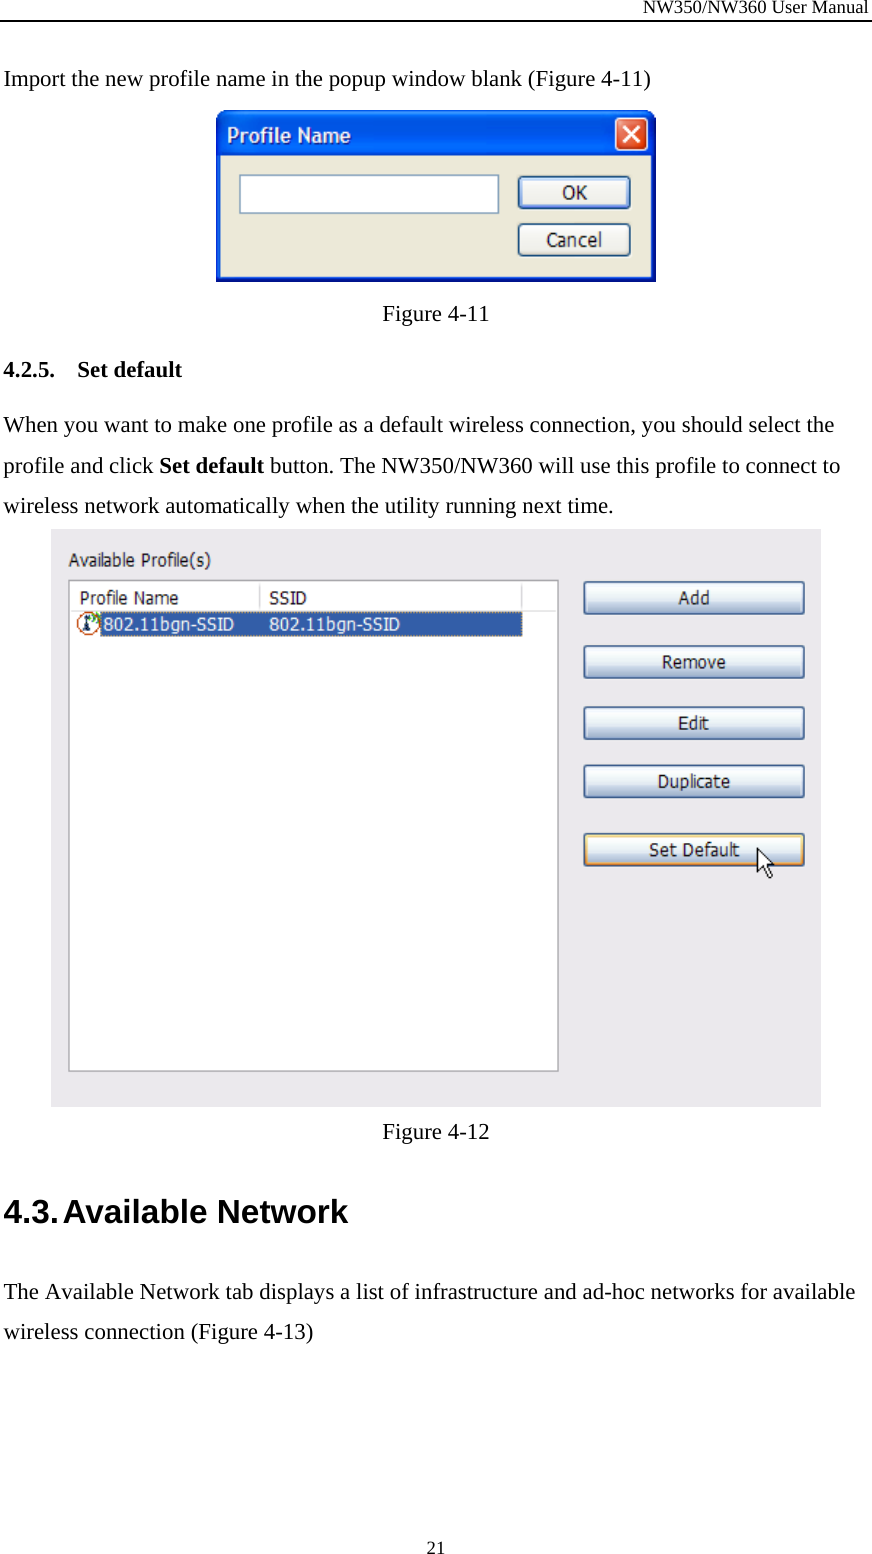 NW350/NW360 User Manual  21Import the new profile name in the popup window blank (Figure  4-11)  Figure  4-11 4.2.5. Set default When you want to make one profile as a default wireless connection, you should select the profile and click Set default button. The NW350/NW360 will use this profile to connect to wireless network automatically when the utility running next time.  Figure  4-12 4.3. Available  Network The Available Network tab displays a list of infrastructure and ad-hoc networks for available wireless connection (Figure  4-13) 